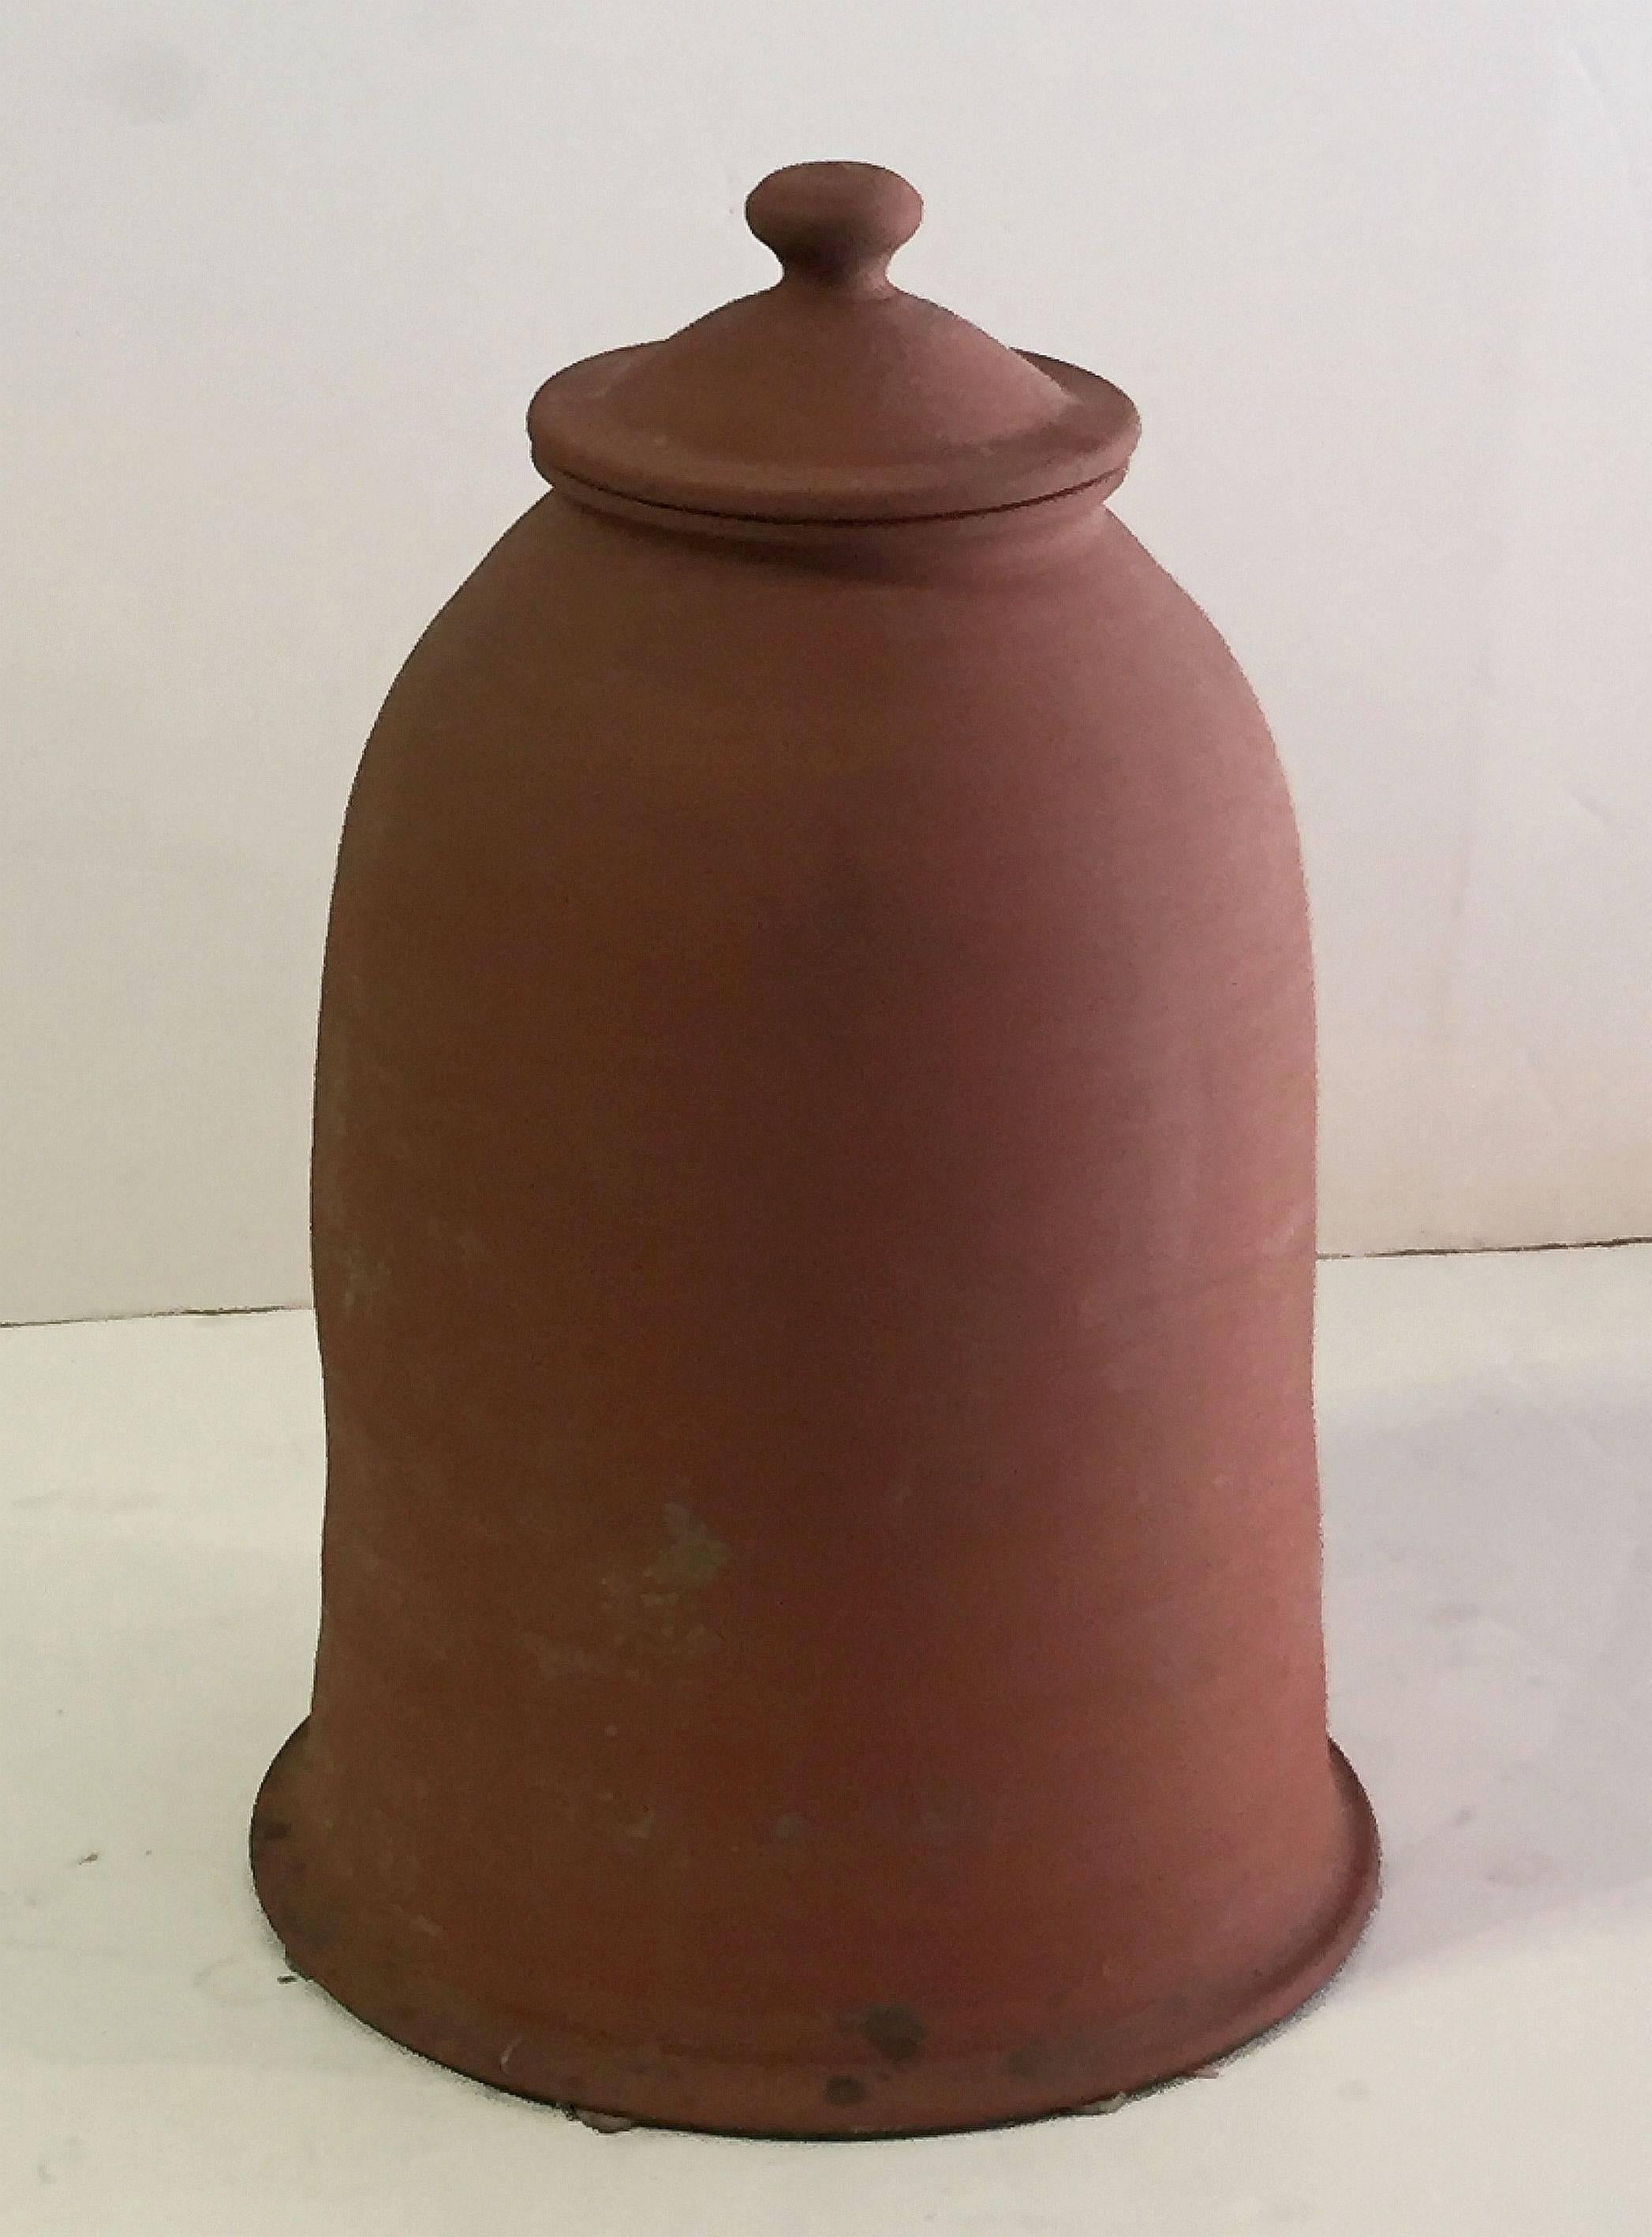 A fine English rhubarb forcer or cloche of terra cotta pottery, for the garden, featuring a bell shape and removable lid.

Rhubarb forcers are bell-shaped pots with a lid covered opening at the top. Used to cover rhubarb to limit photosynthesis,